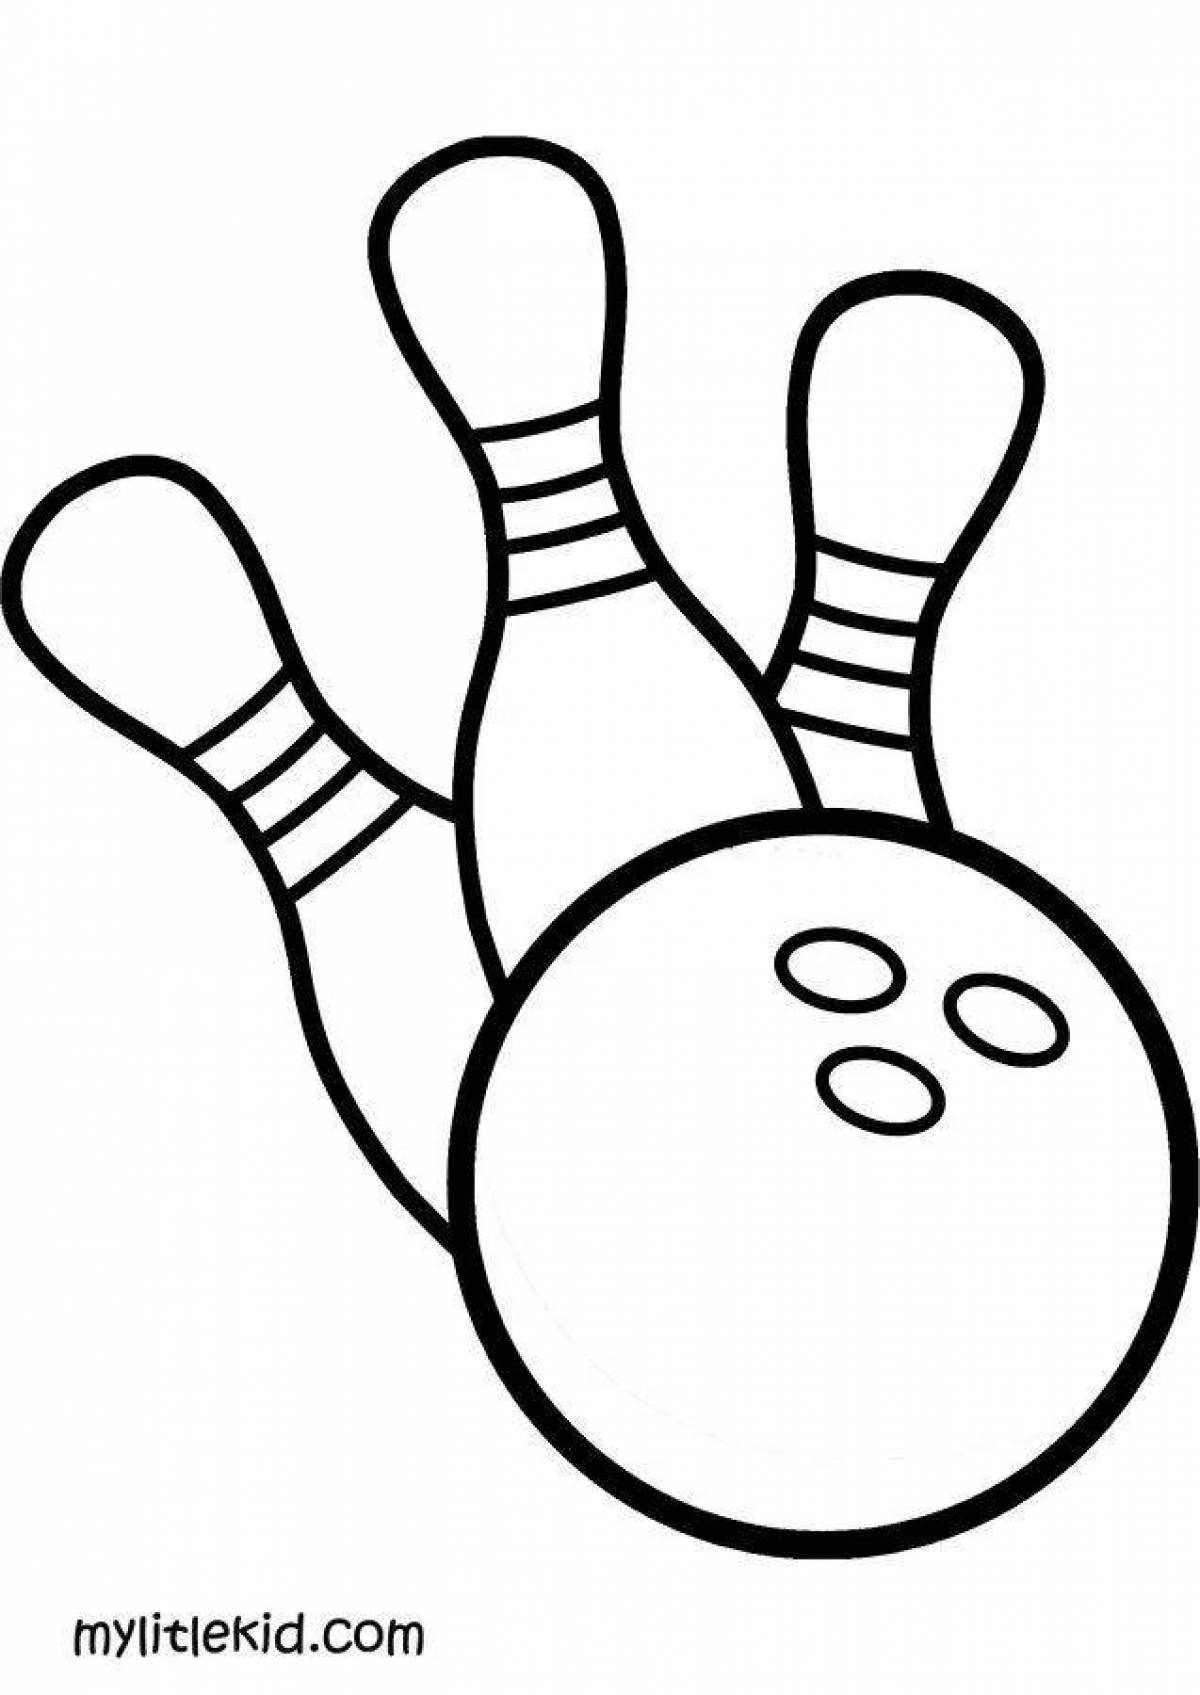 Skittles coloring pages